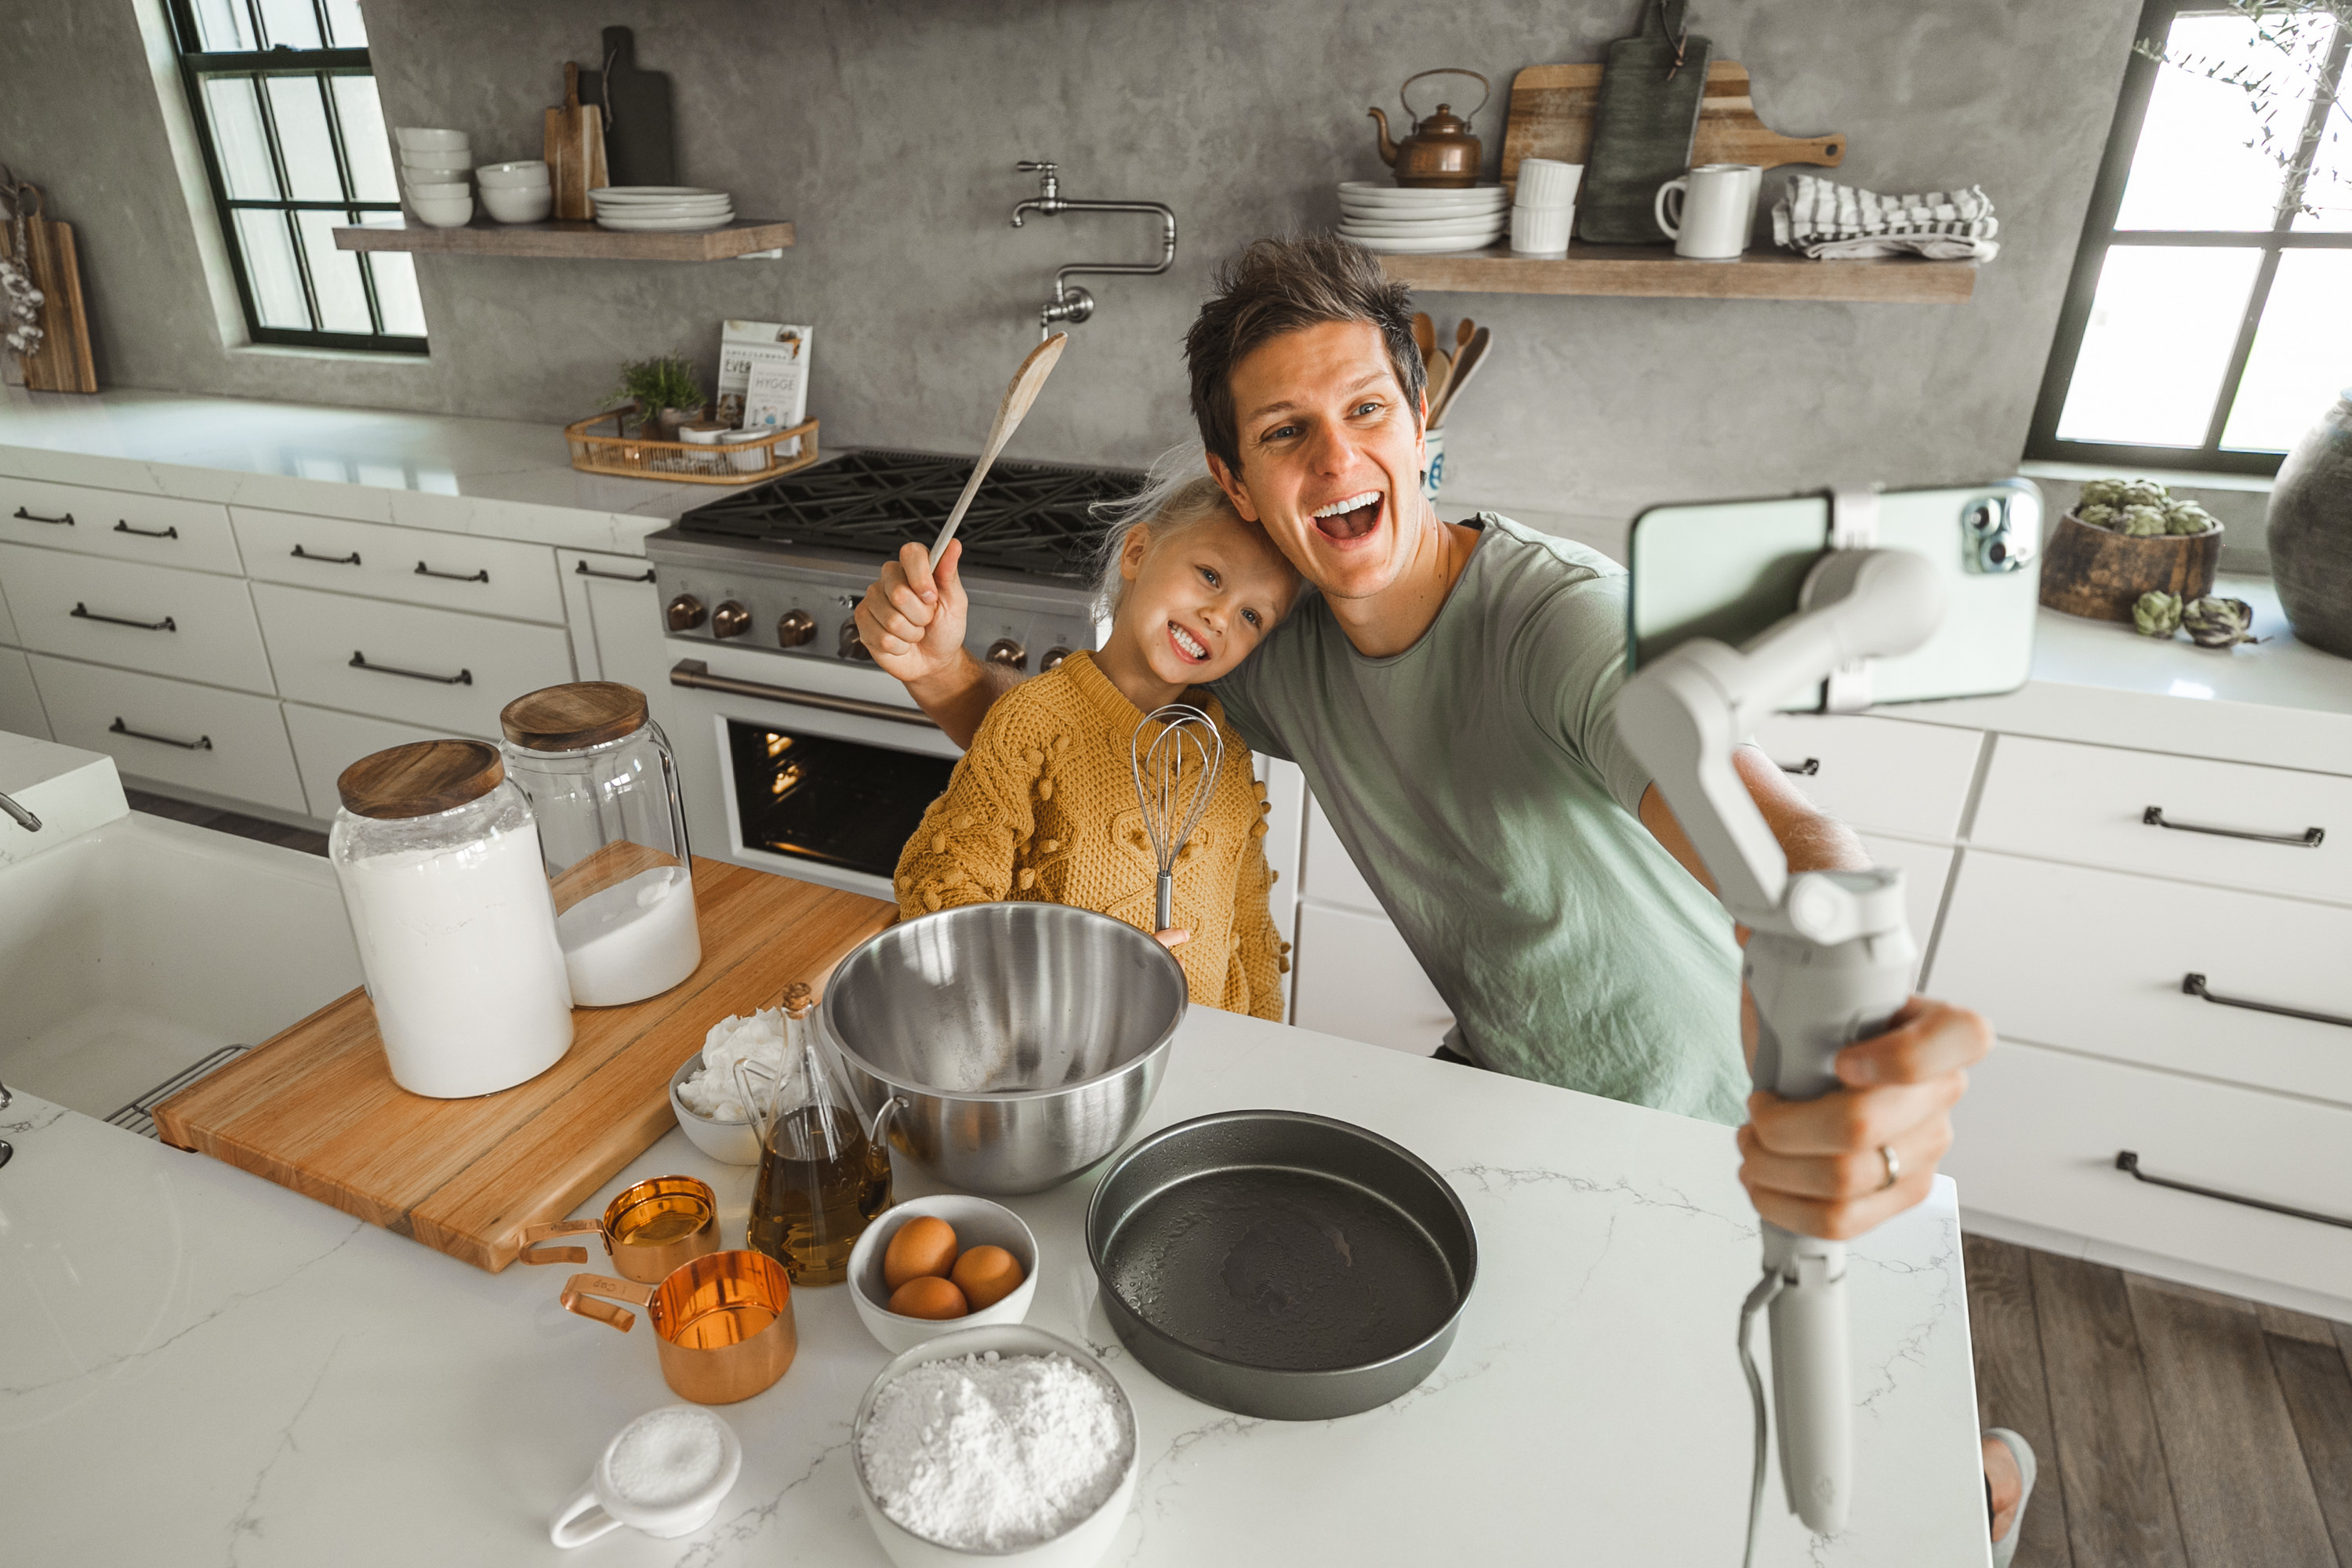 A father taking a video selfie with his daughter behind cooking ingredients